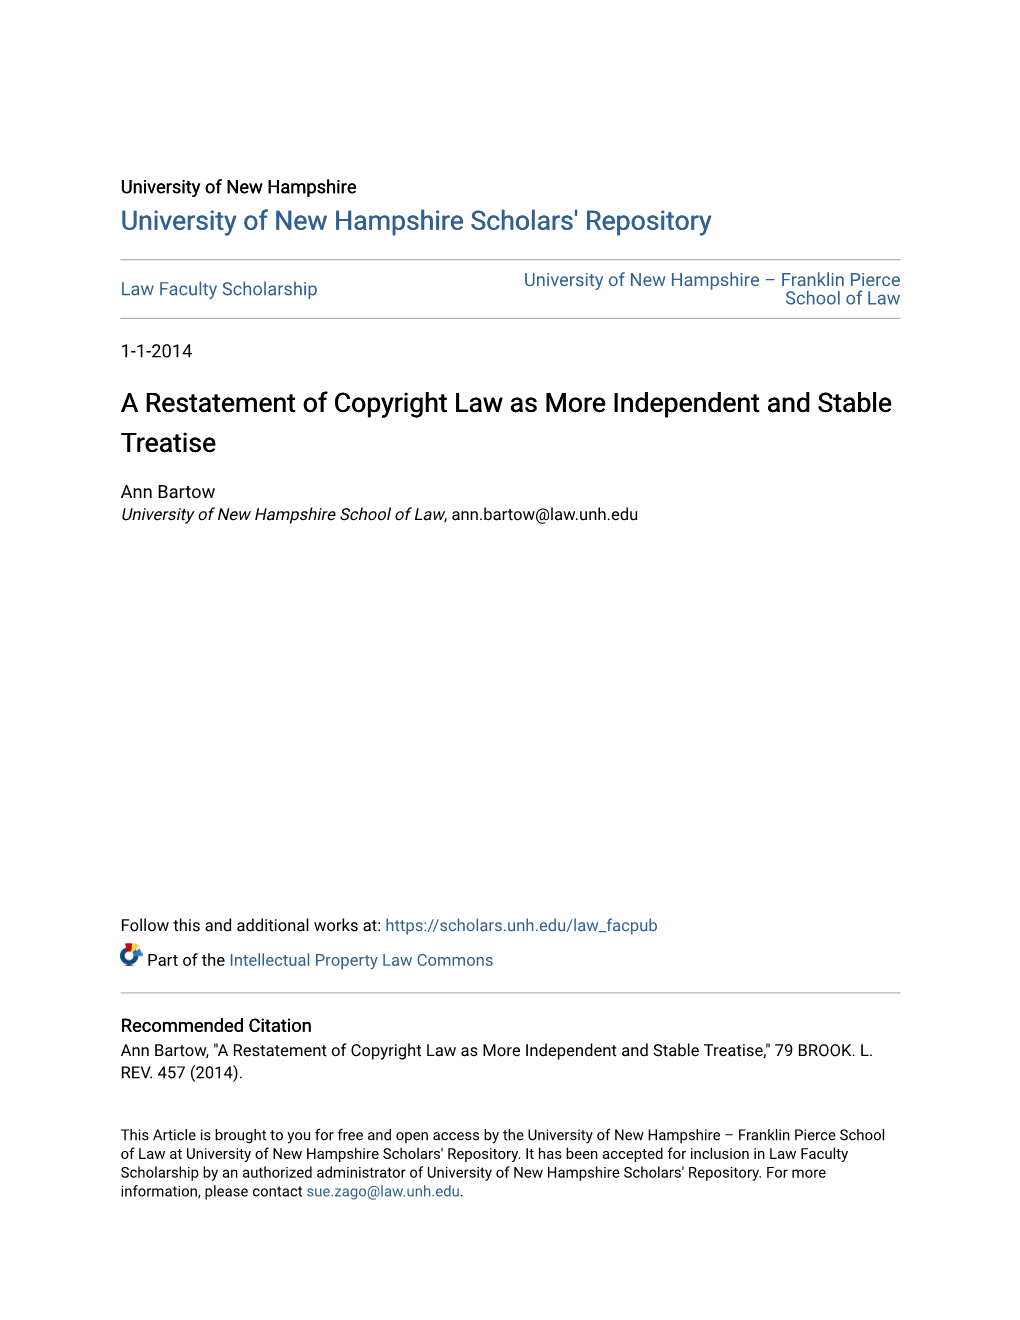 A Restatement of Copyright Law As More Independent and Stable Treatise